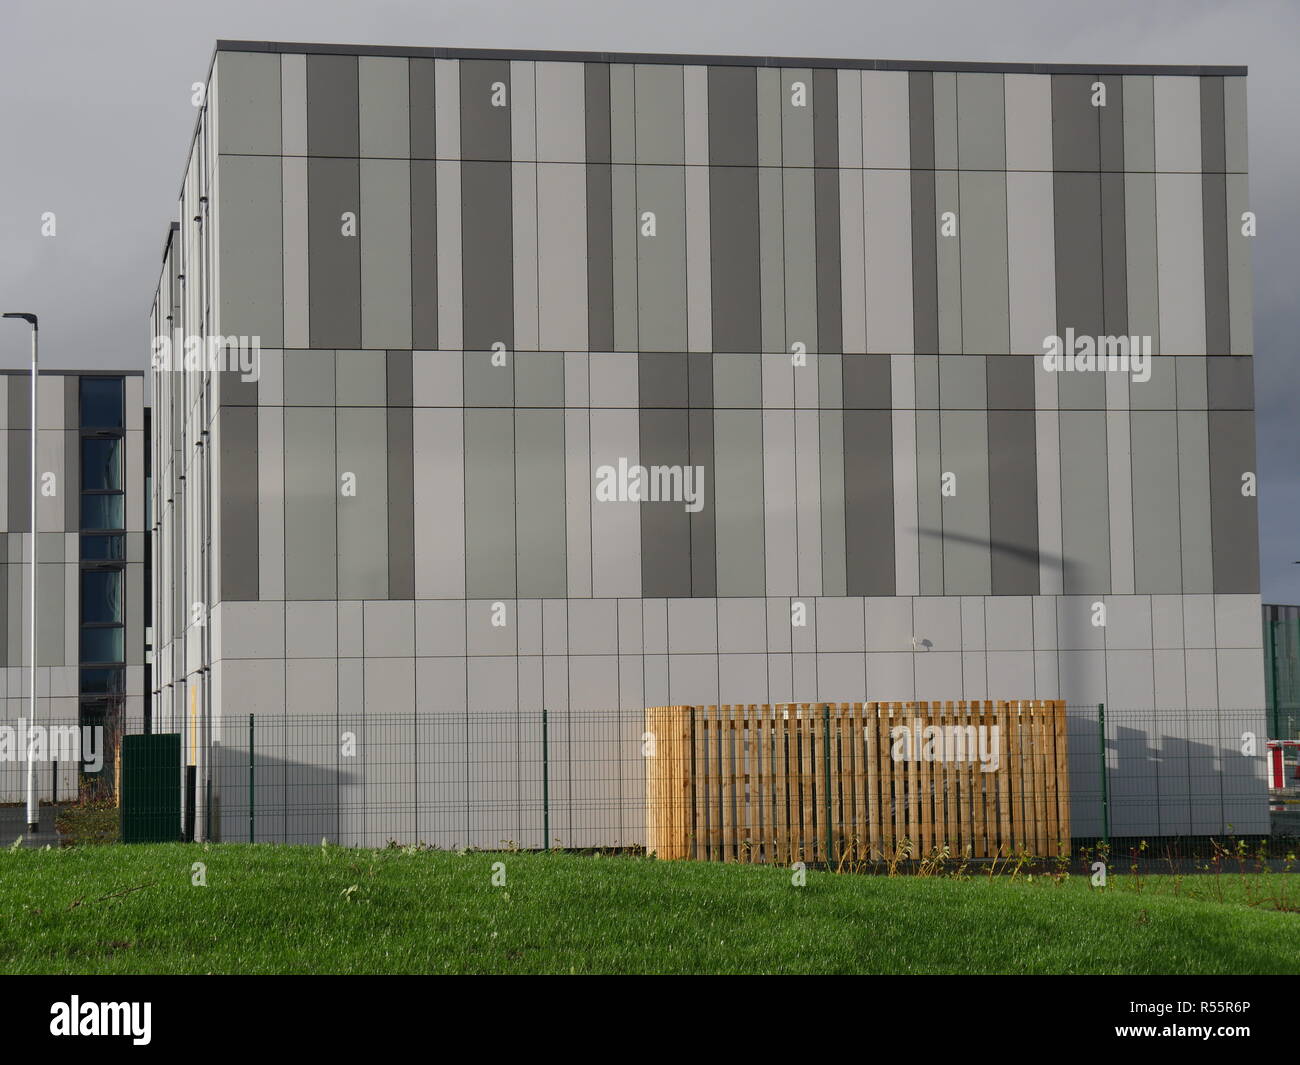 Nuclear Power Station workers accommodation Sedgemoor Campus, Bridgwater, Somerset, UK, Stock Photo